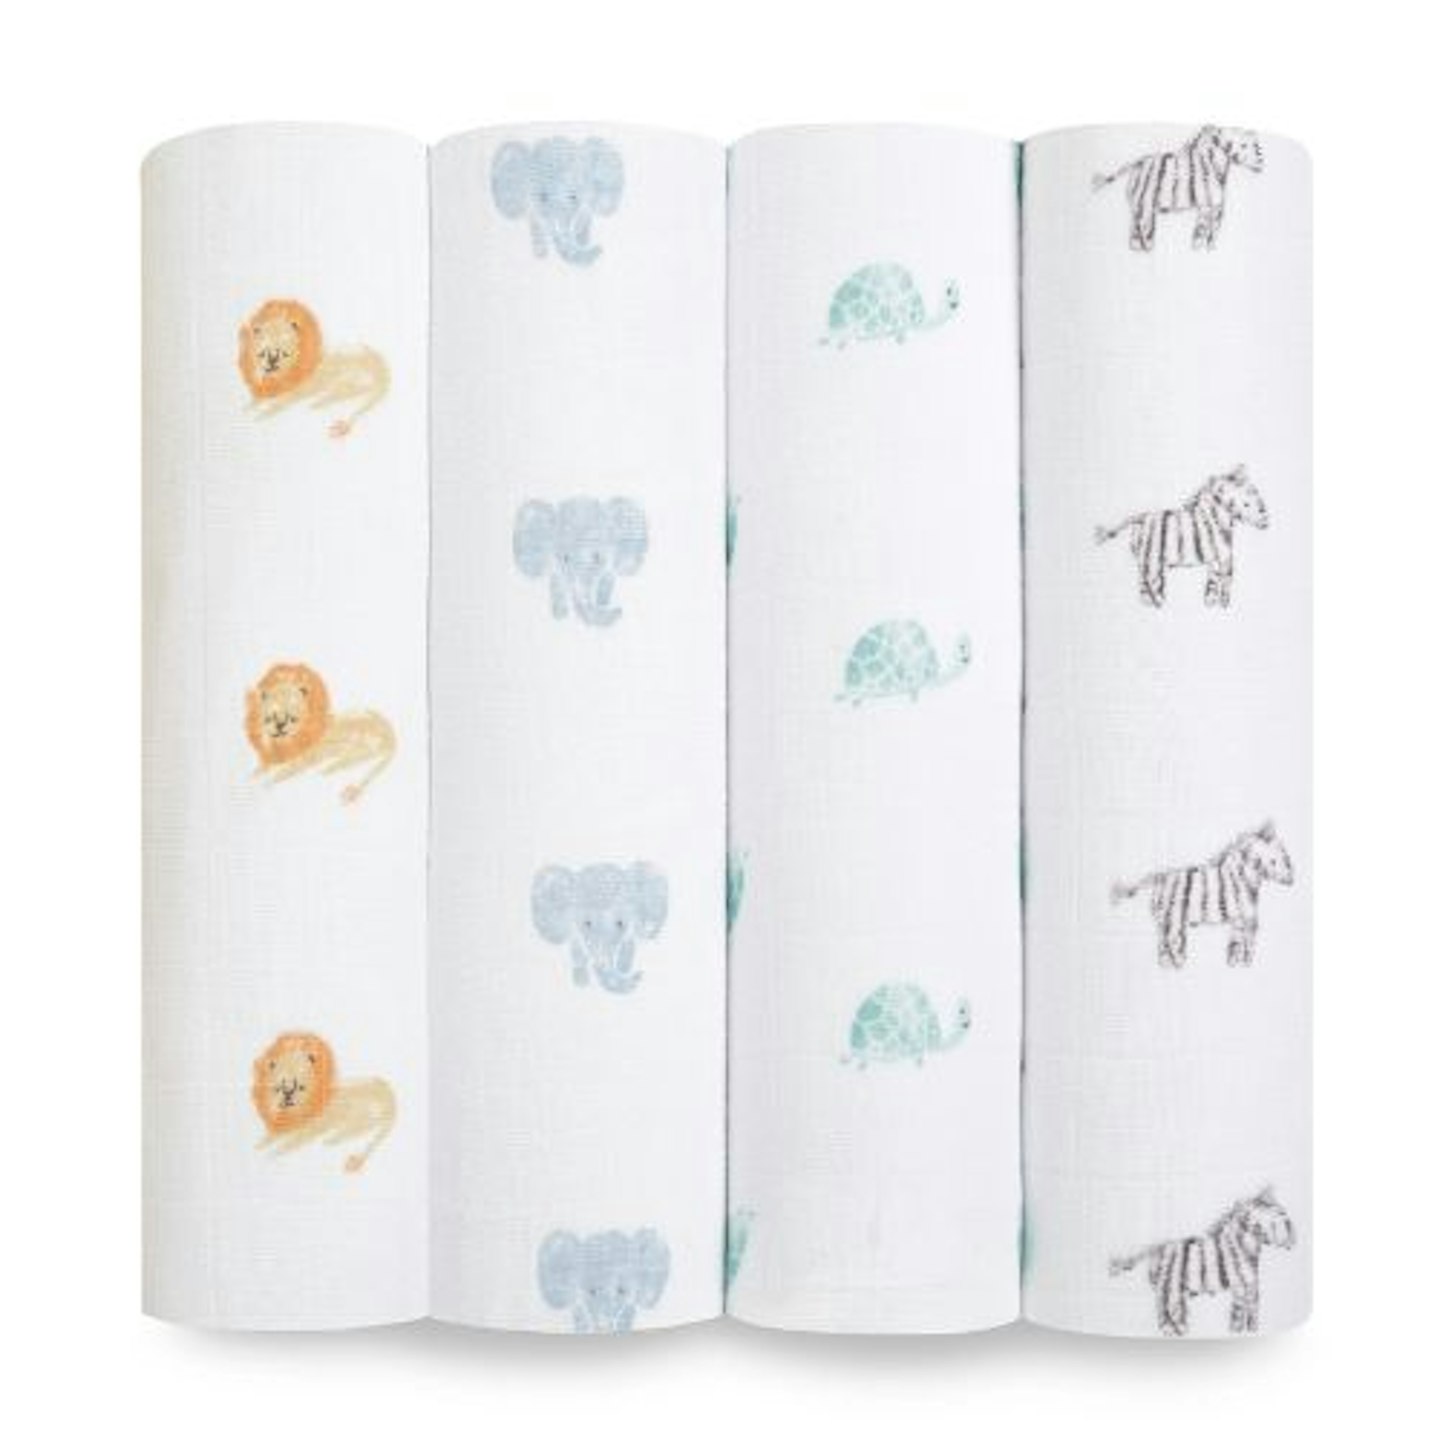 aden + anais Organic Cotton Swaddles 4-Pack